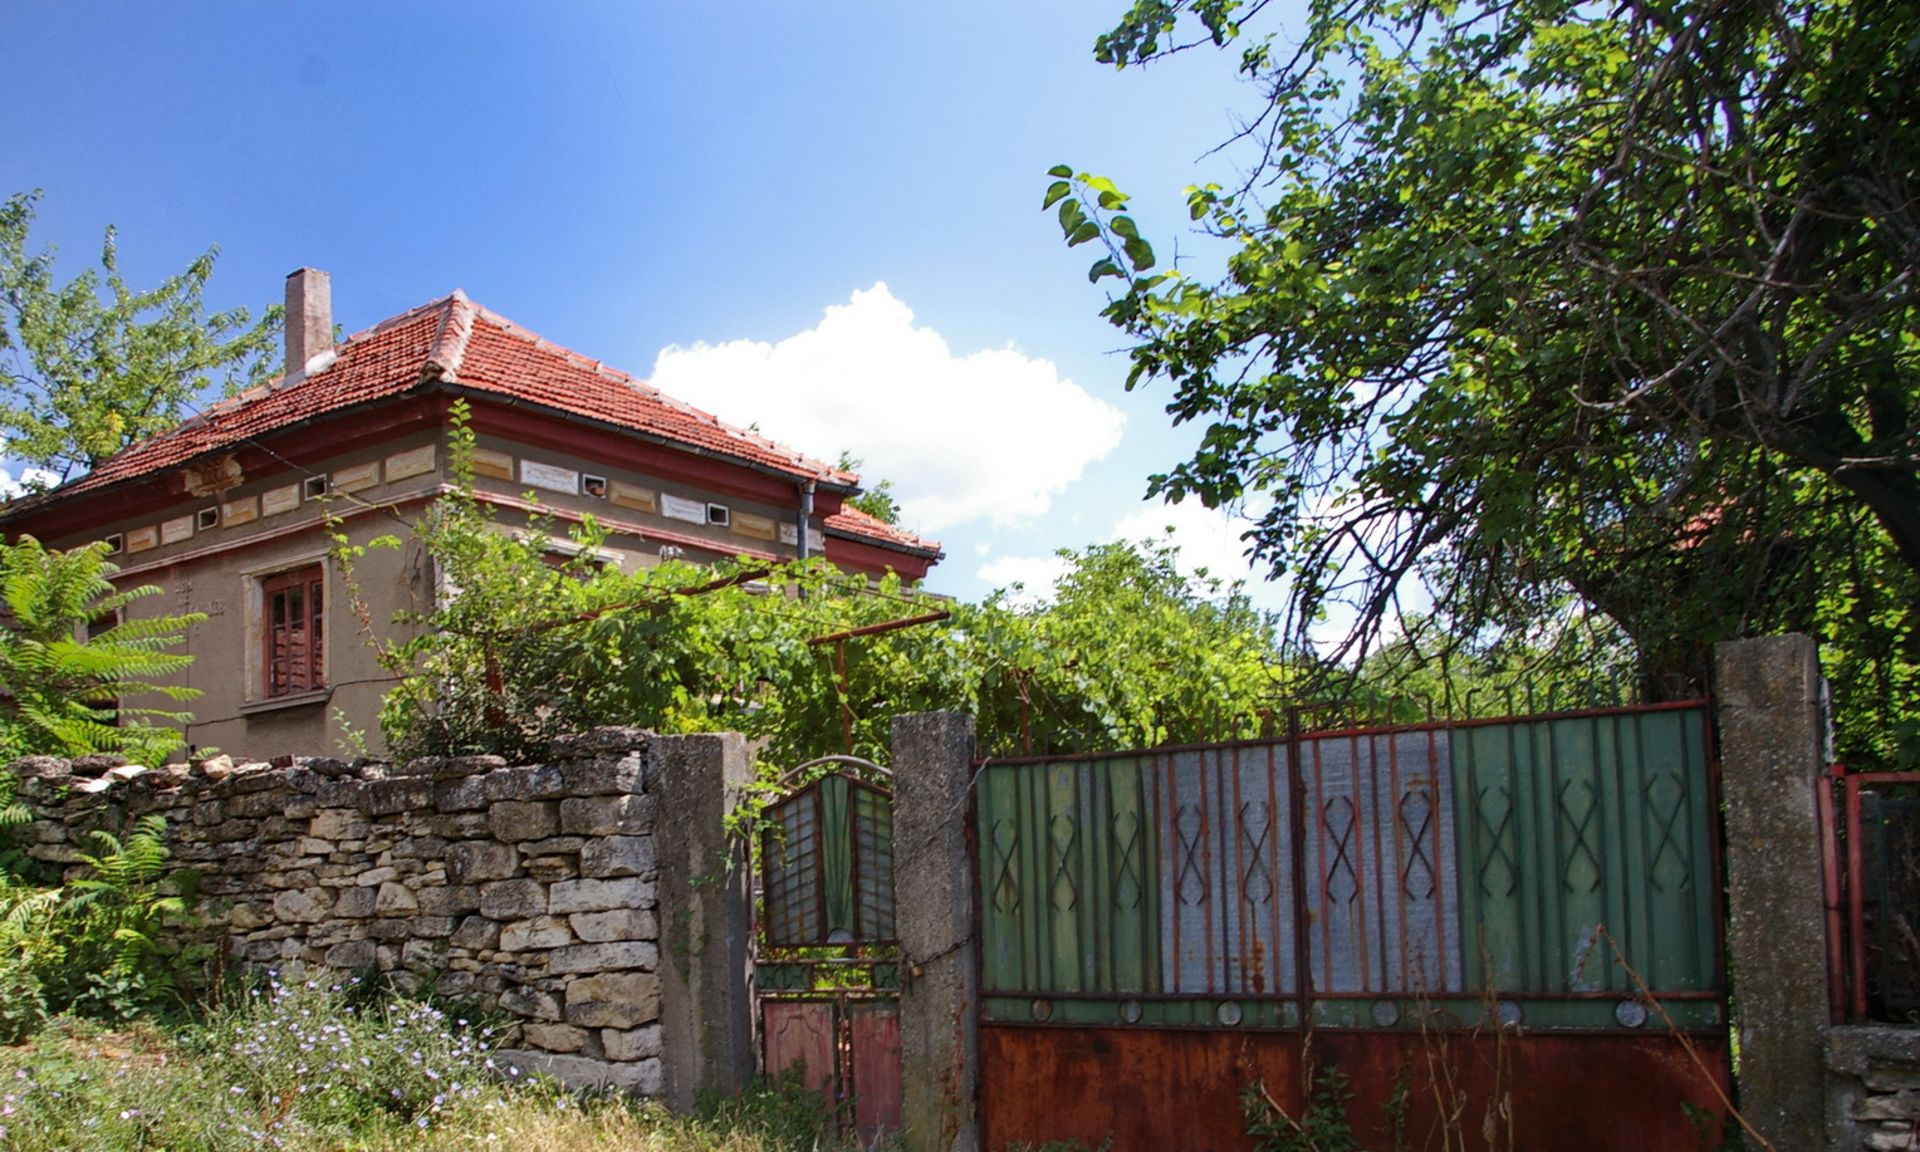 3 Bedroom Main house + extension and over 600 sqm land